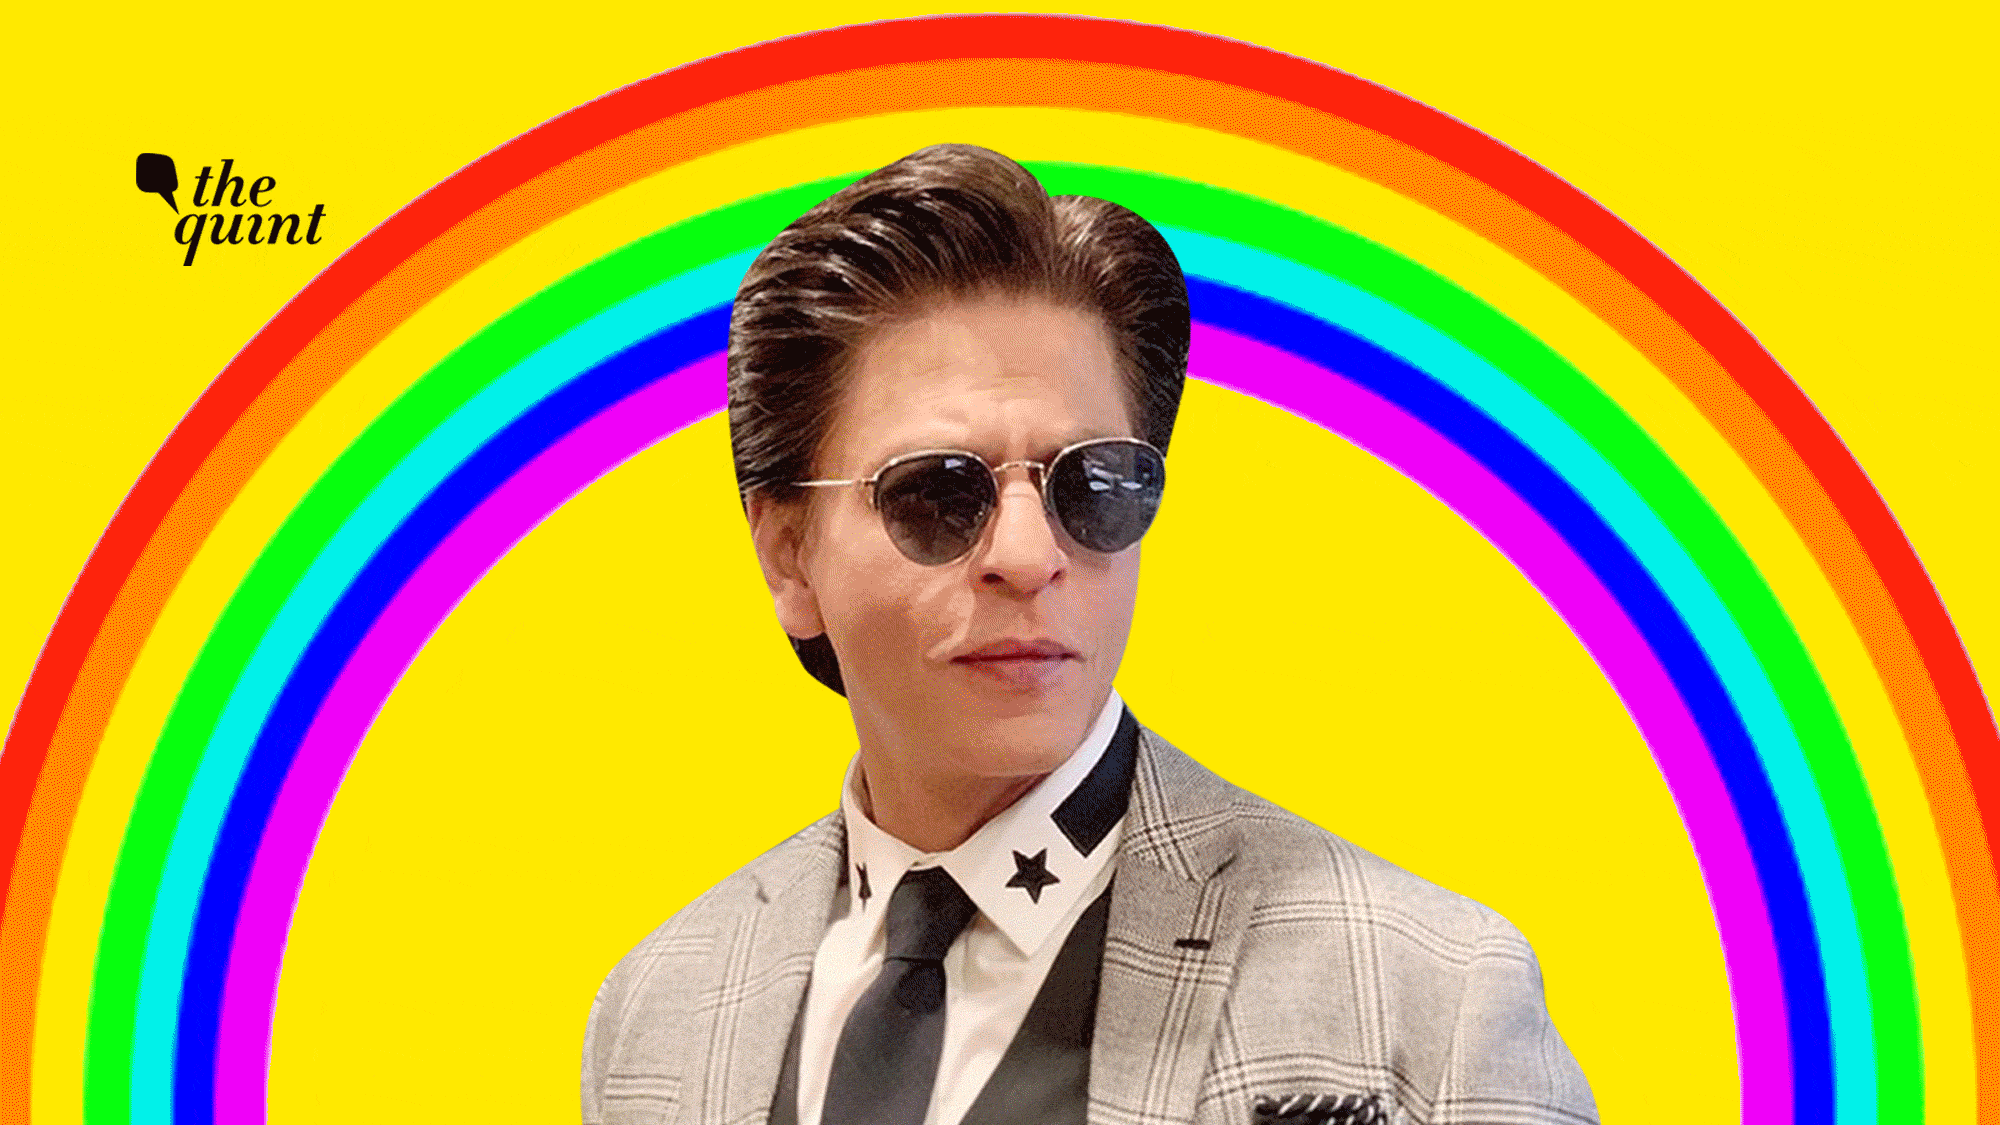 Image of SRK used for representational purposes.